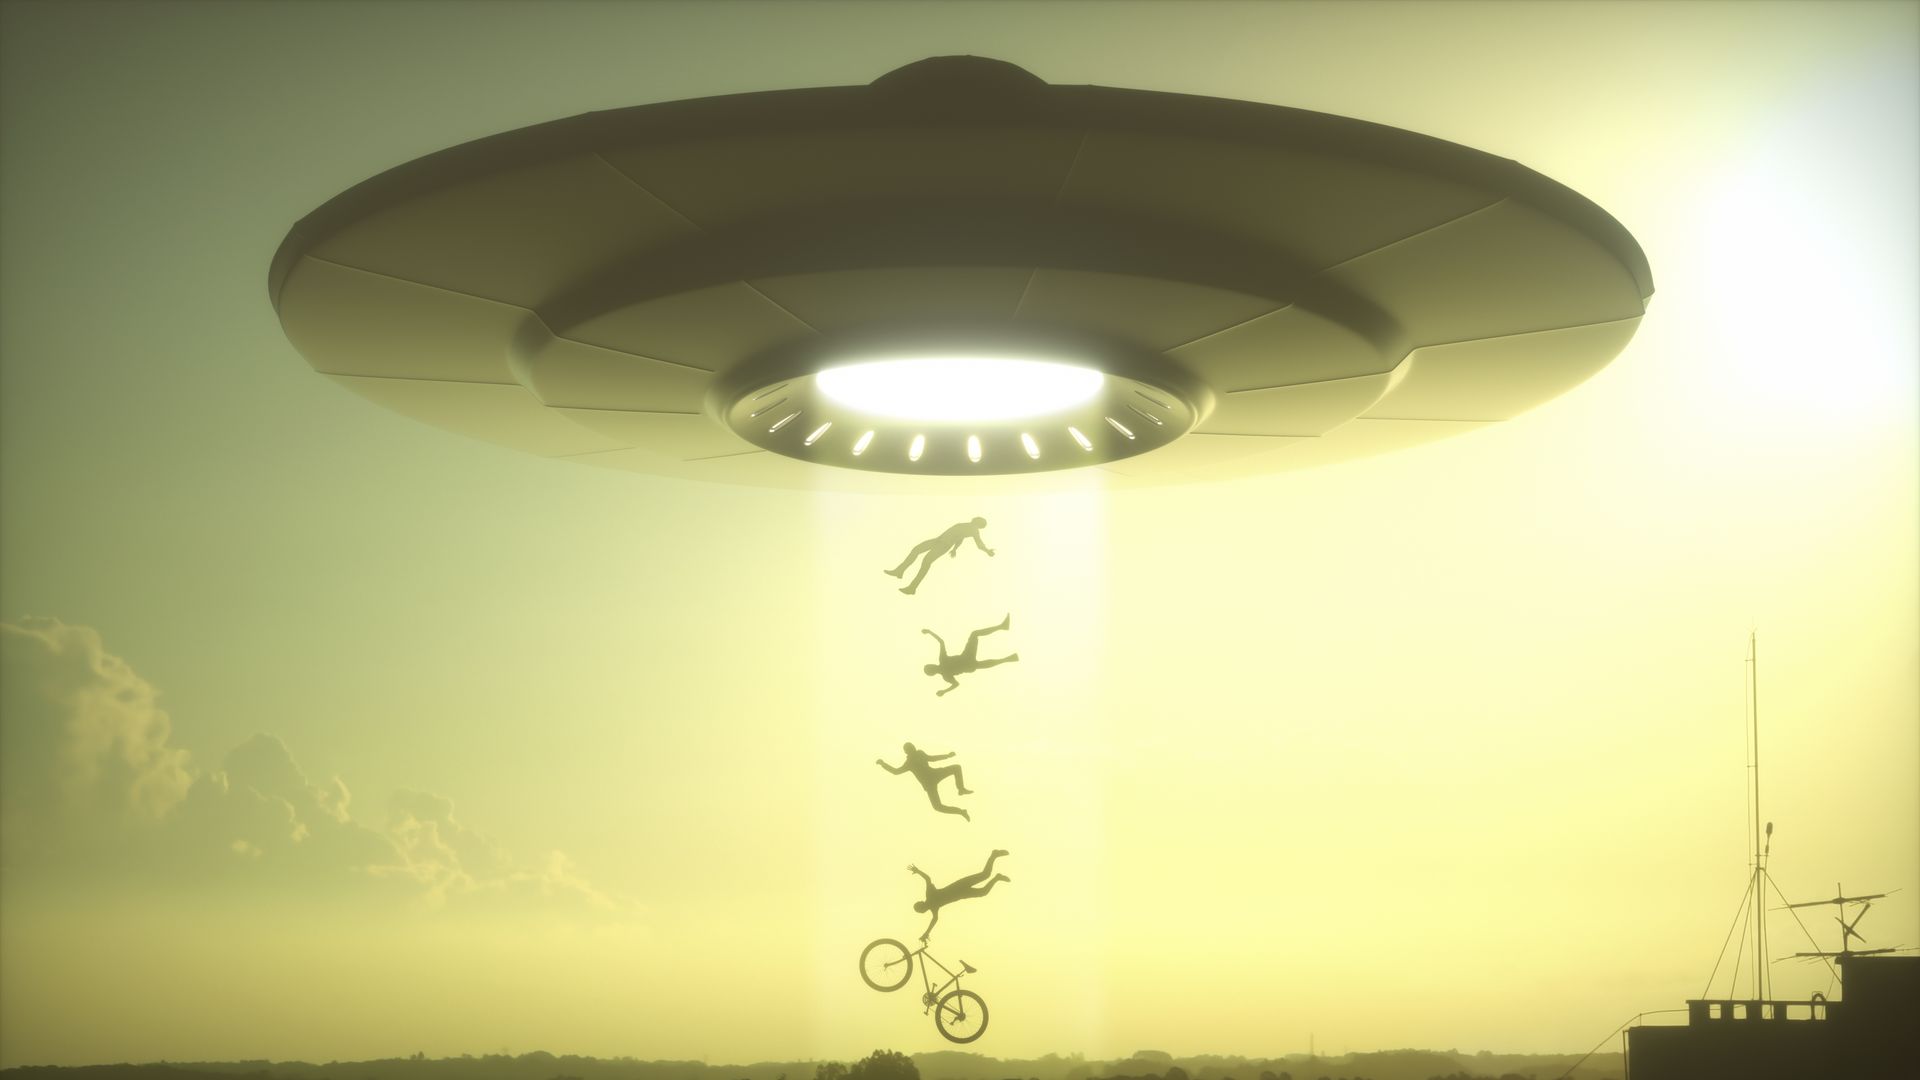 An alien UFO abducting humans